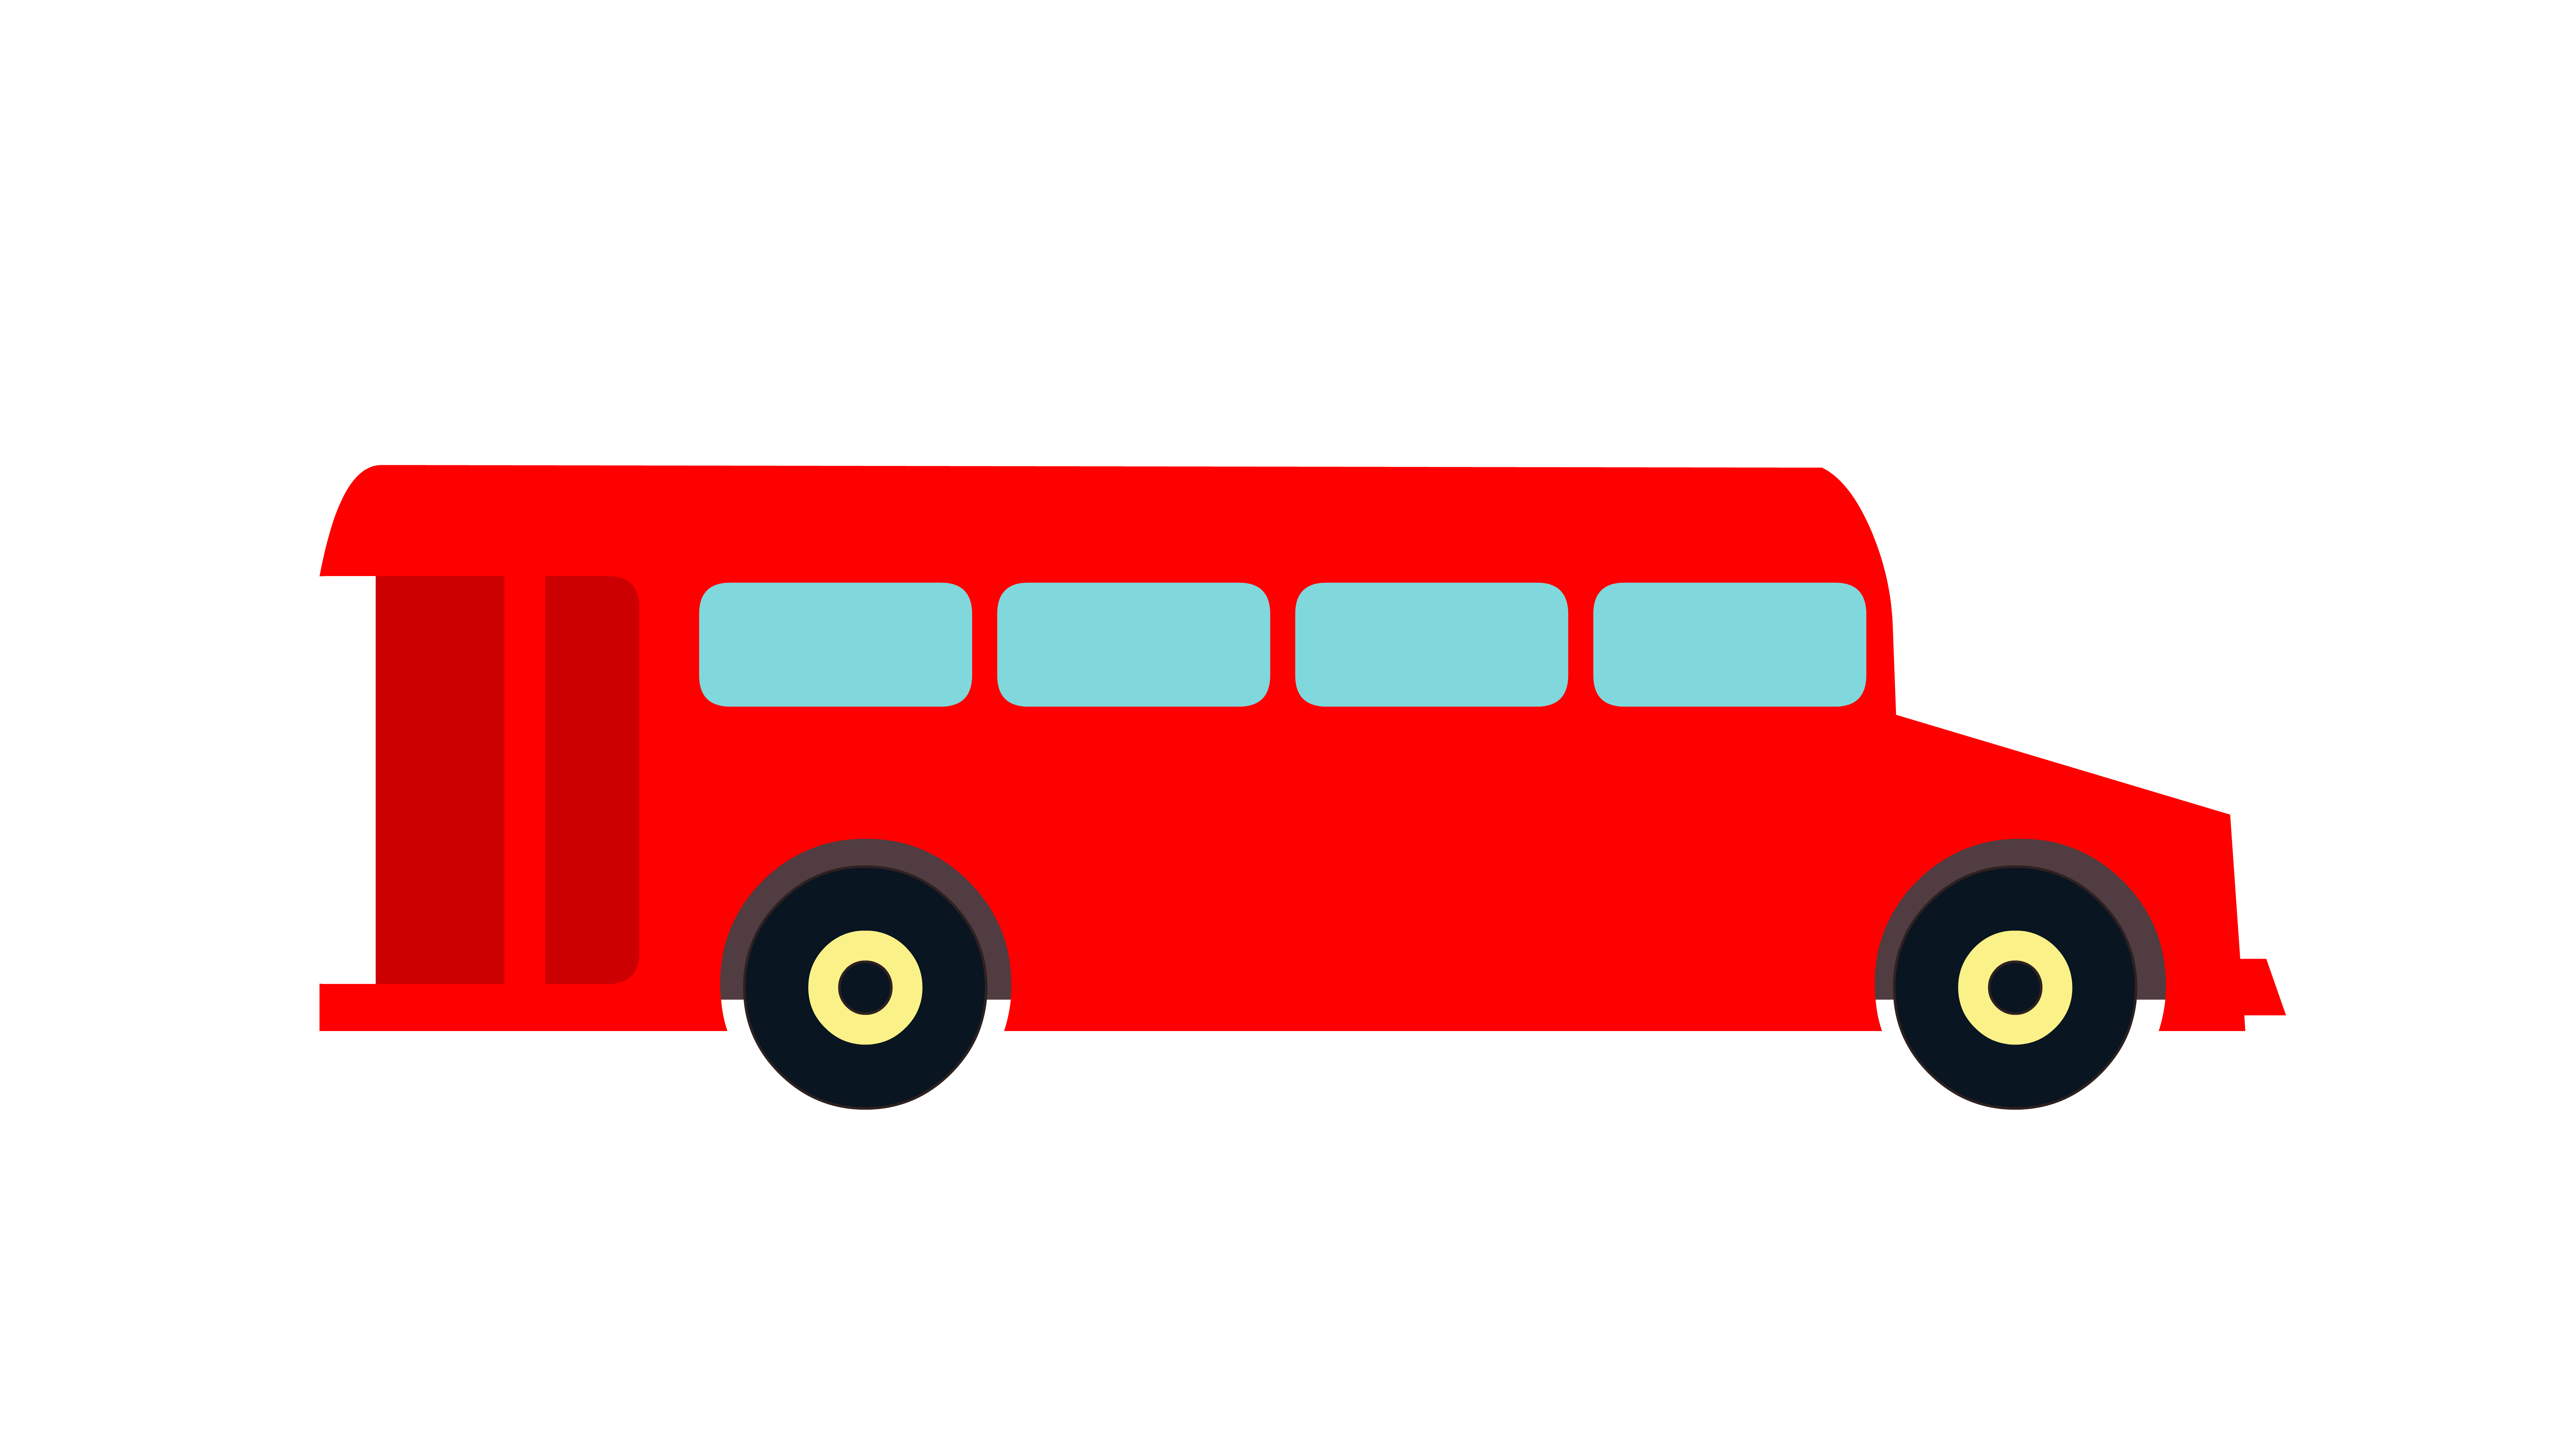 Bus Booking Pro - A booking solution for Bus Fleet owners and Tour package operators